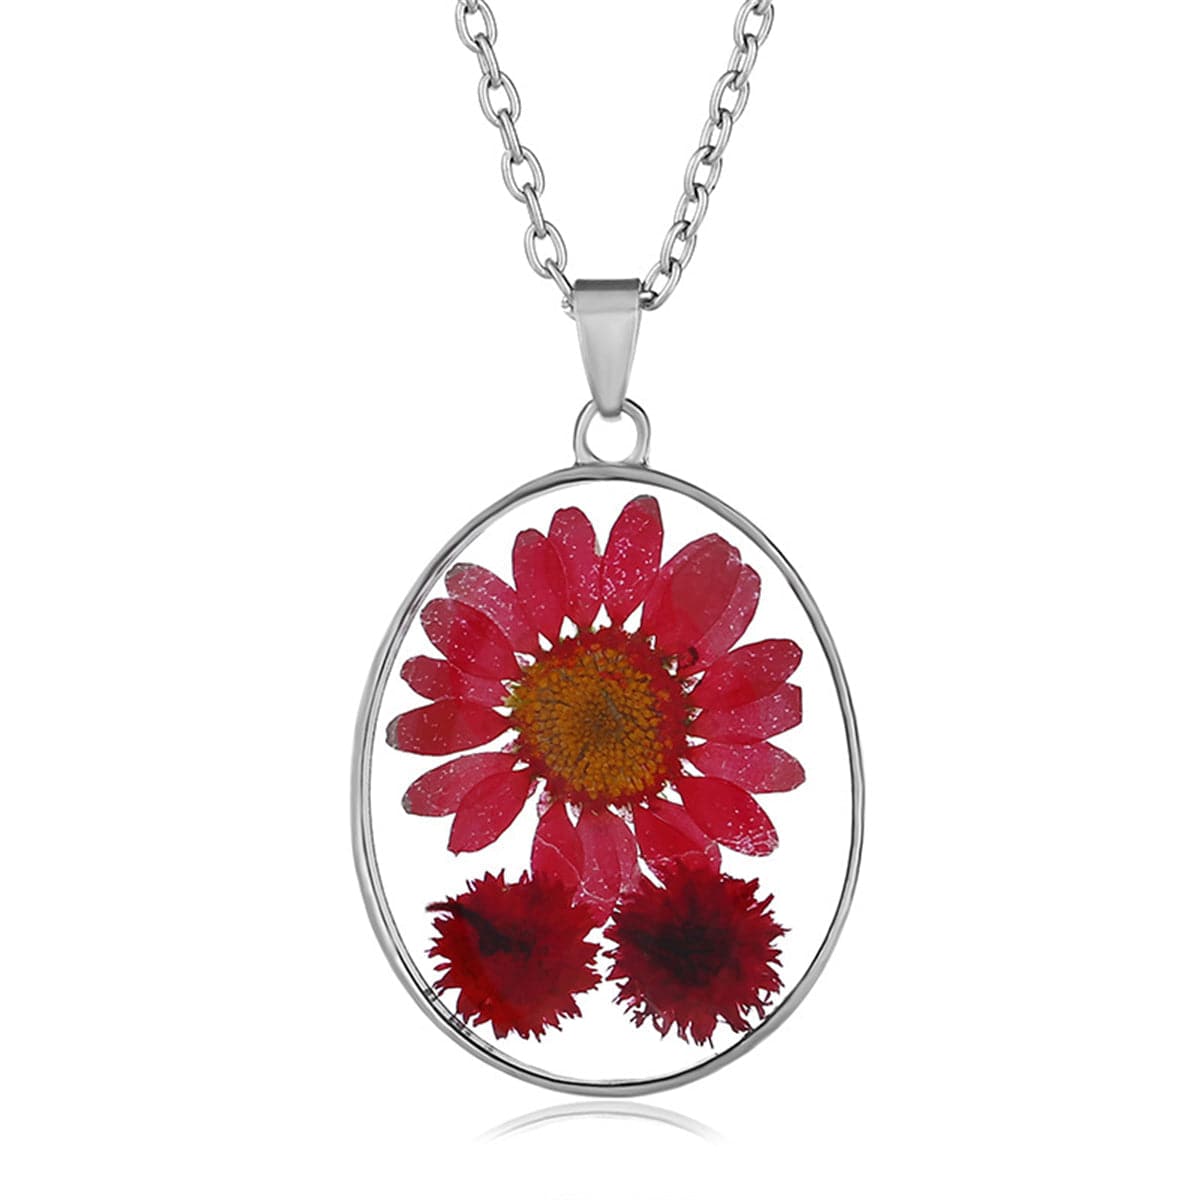 Red Pressed Peach Blossom & Silver-Plated Oval Pendant Necklace